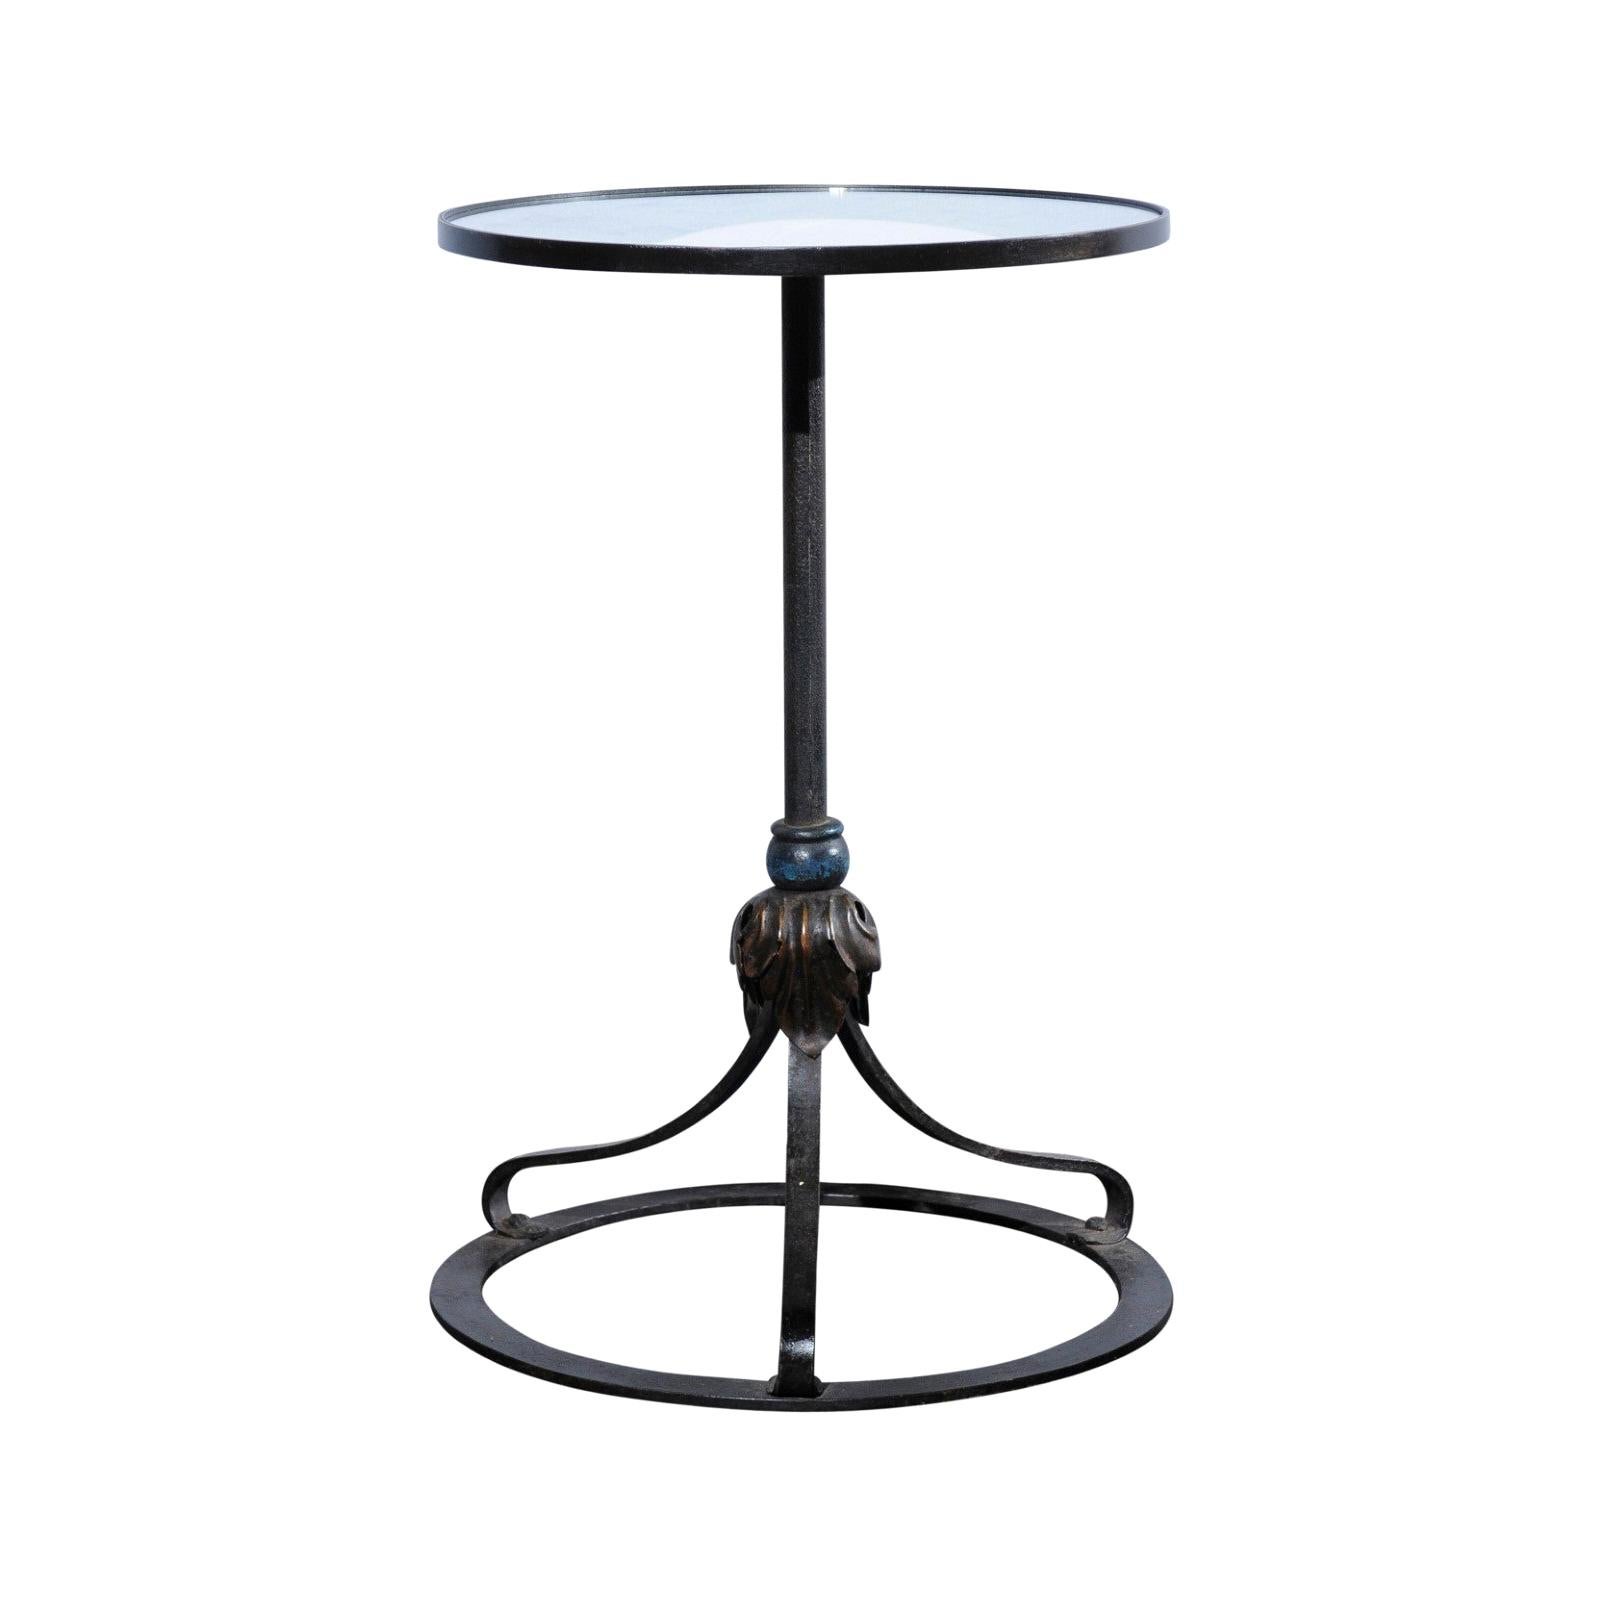 French Round Drinks Table Repurposed from a 1900s Iron Lamp, with Mirrored Top